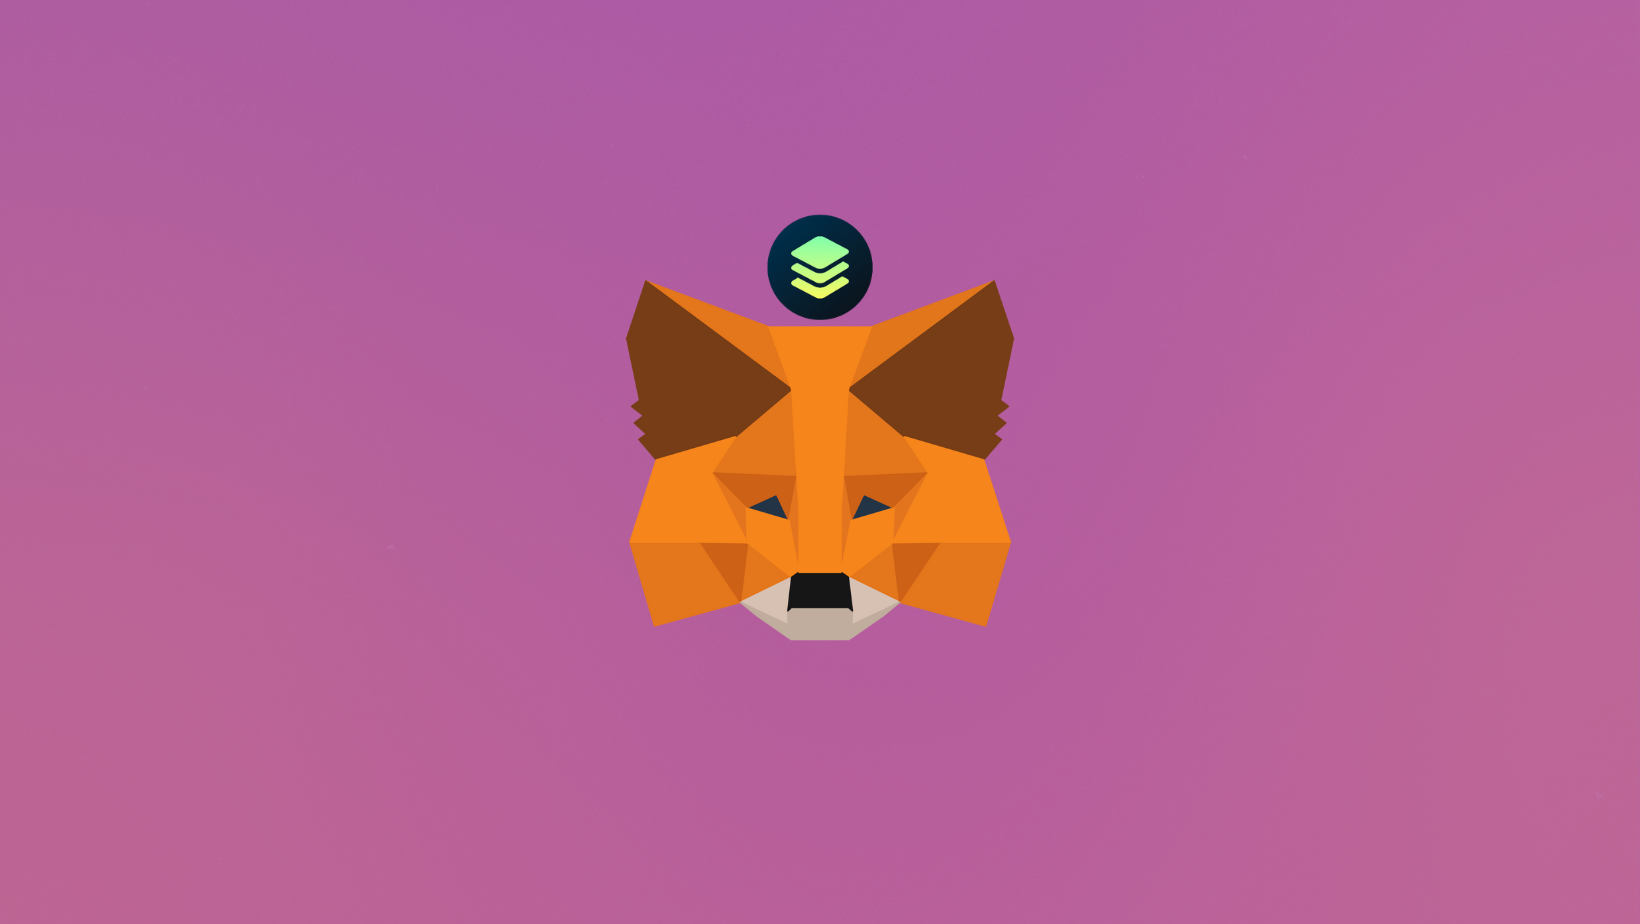 How to add Fuse (FUSE) network to MetaMask